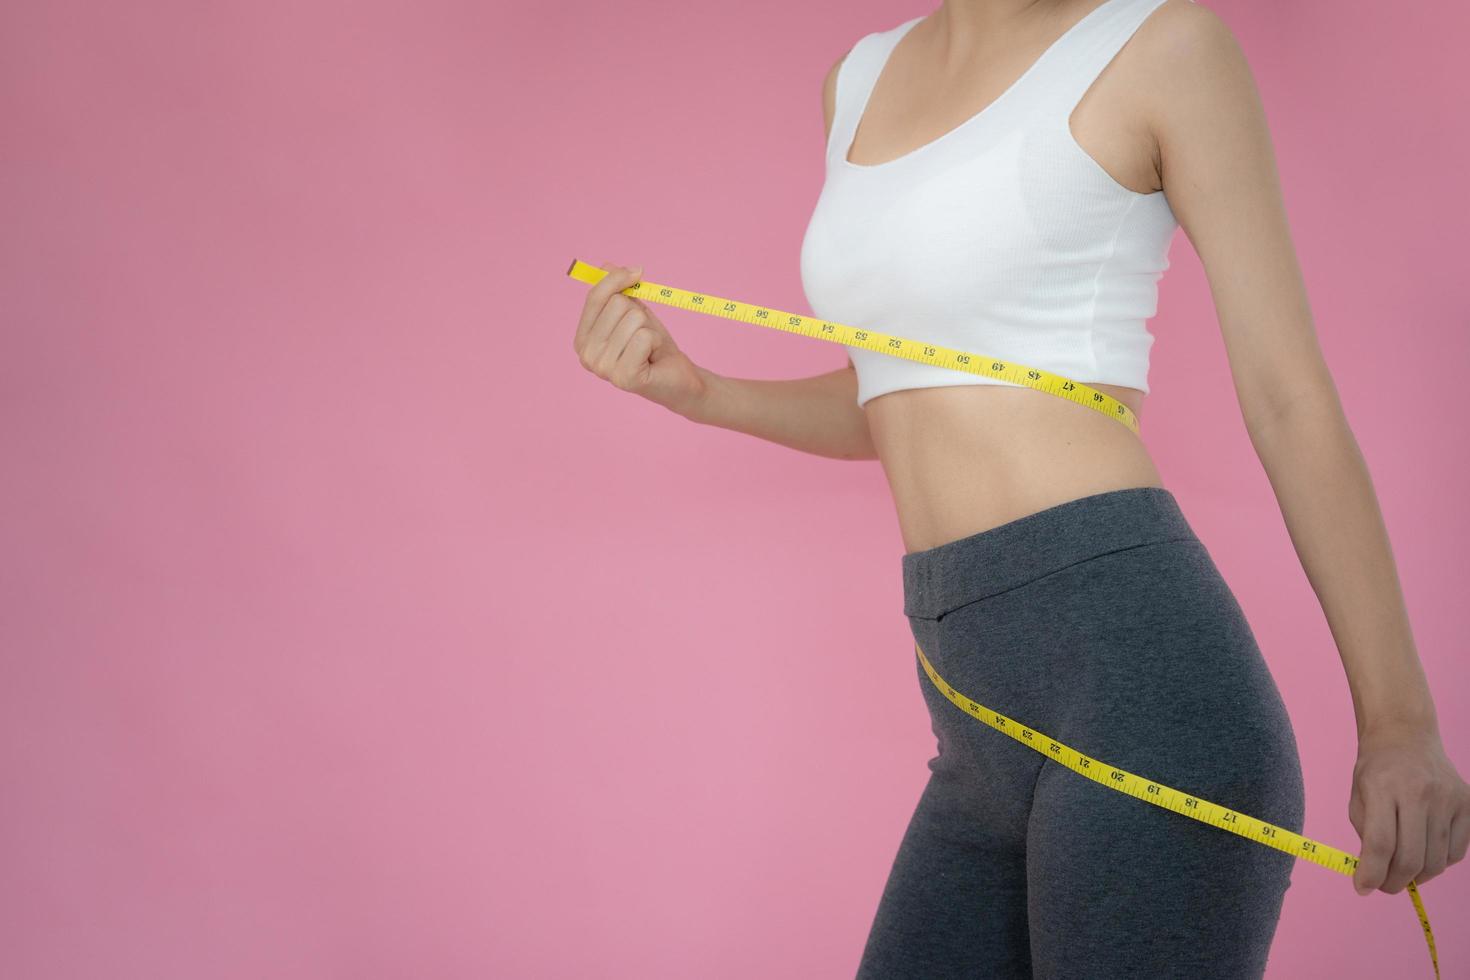 Slim woman in sportswear measures her waist using tape measure on pink background. diet woman and lose weight plan photo